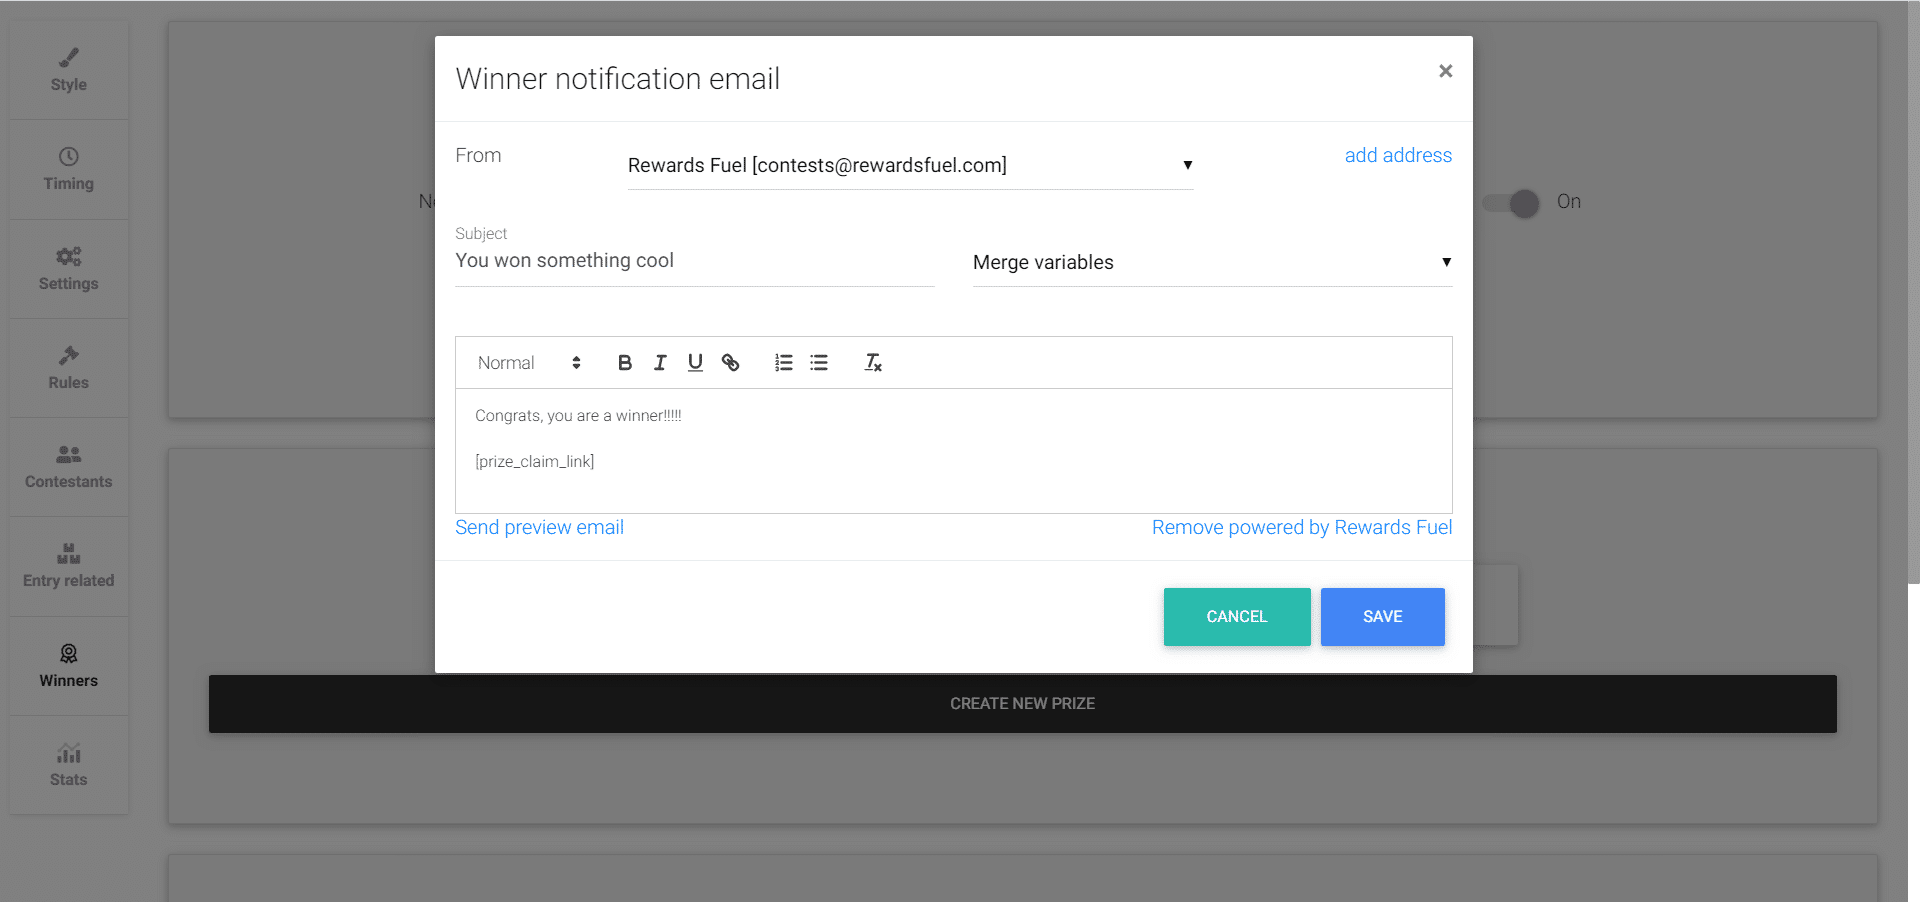 Customize the winner notification email